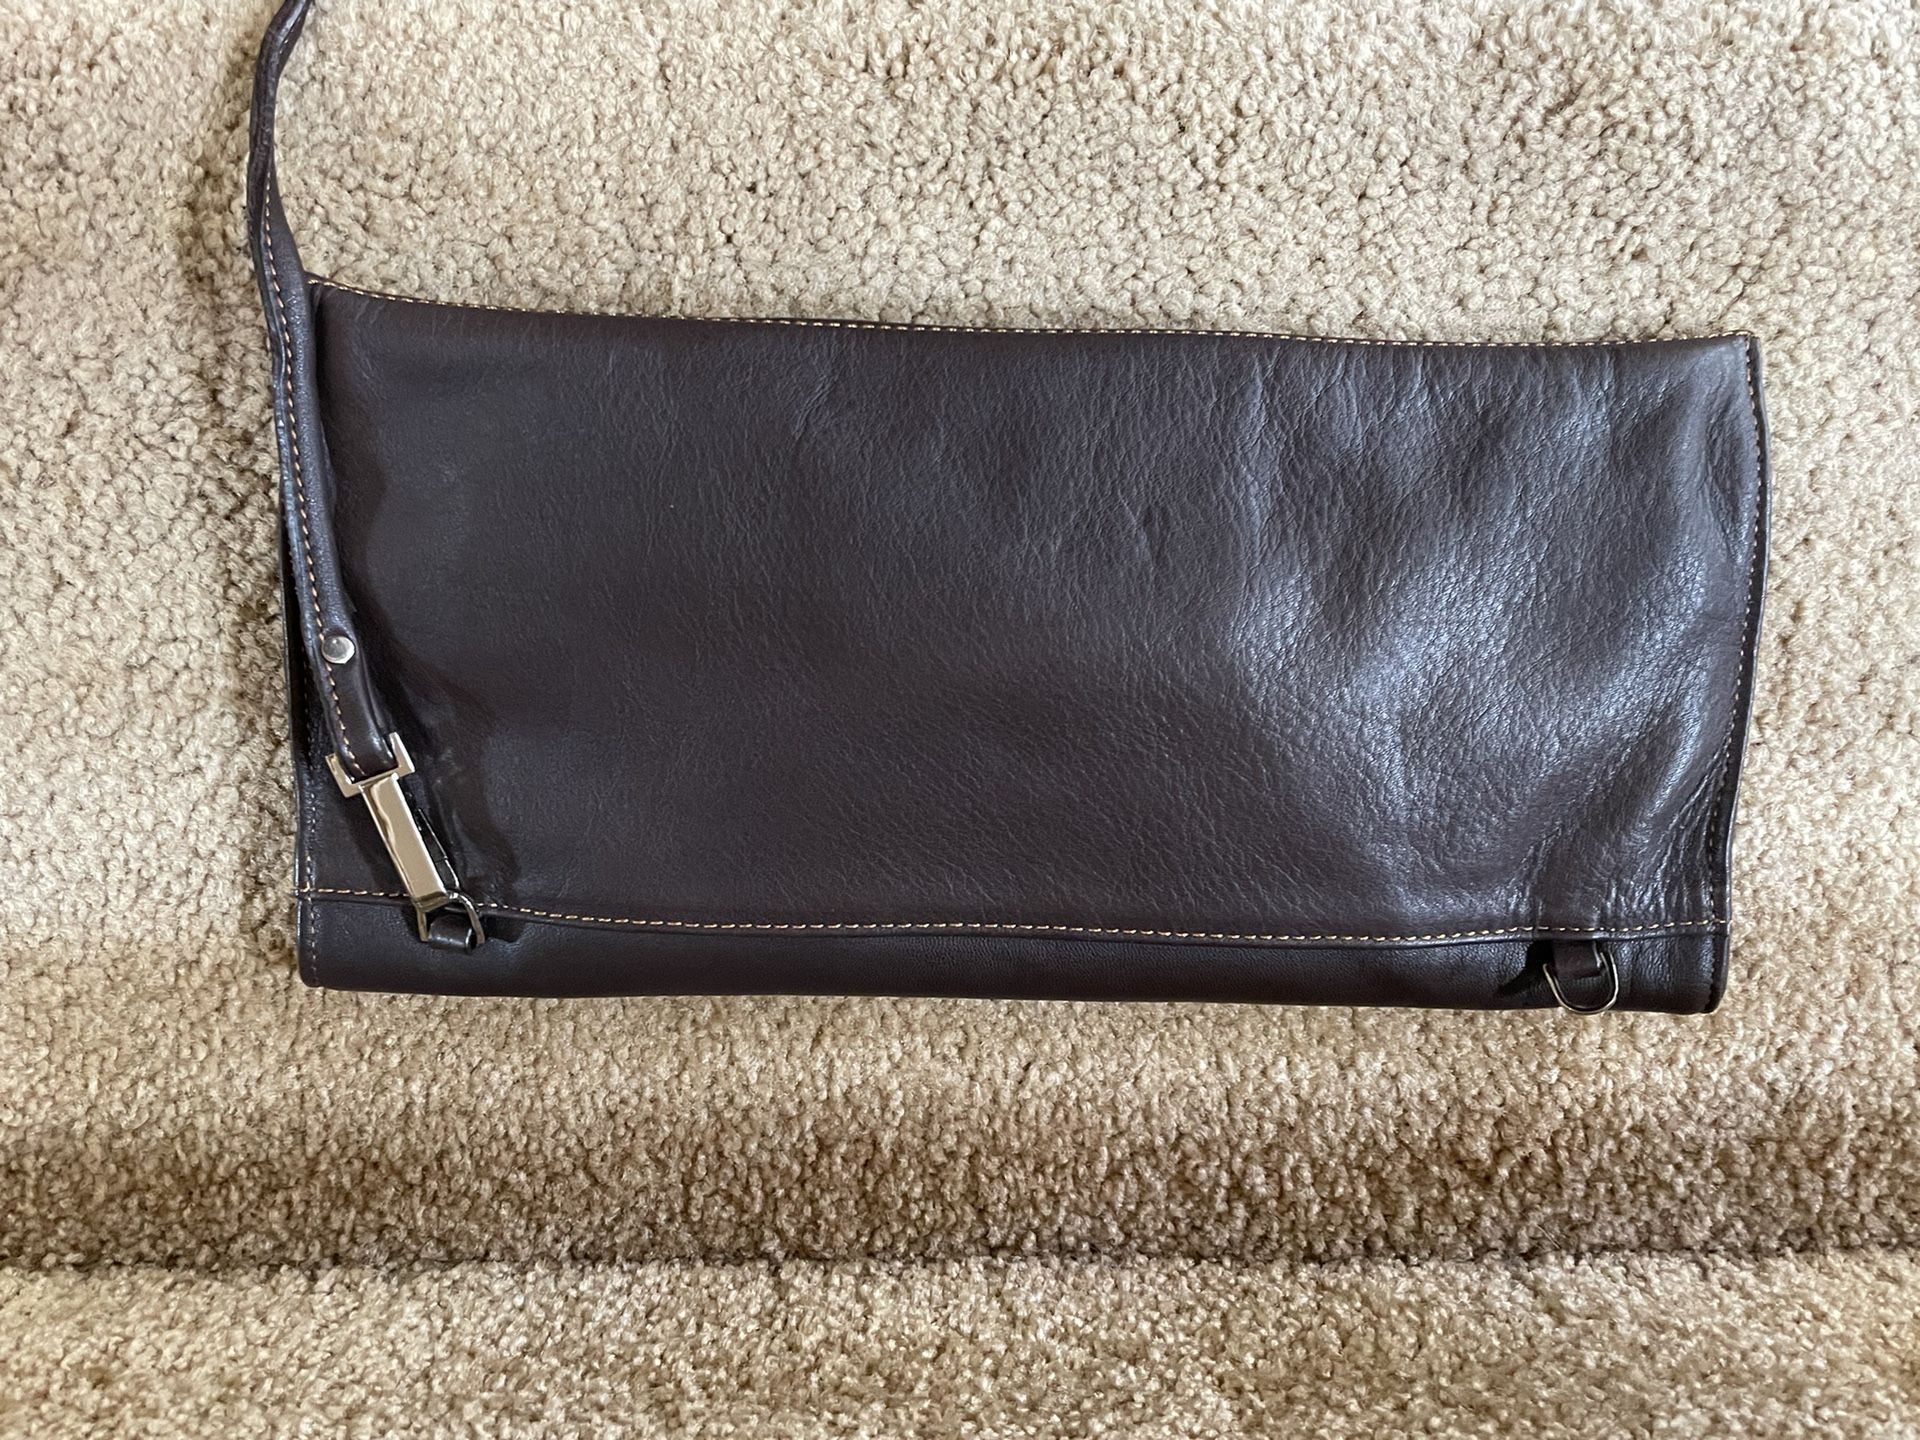 Frederic T Leather Crossbody Bag and Clutch…you chooose.